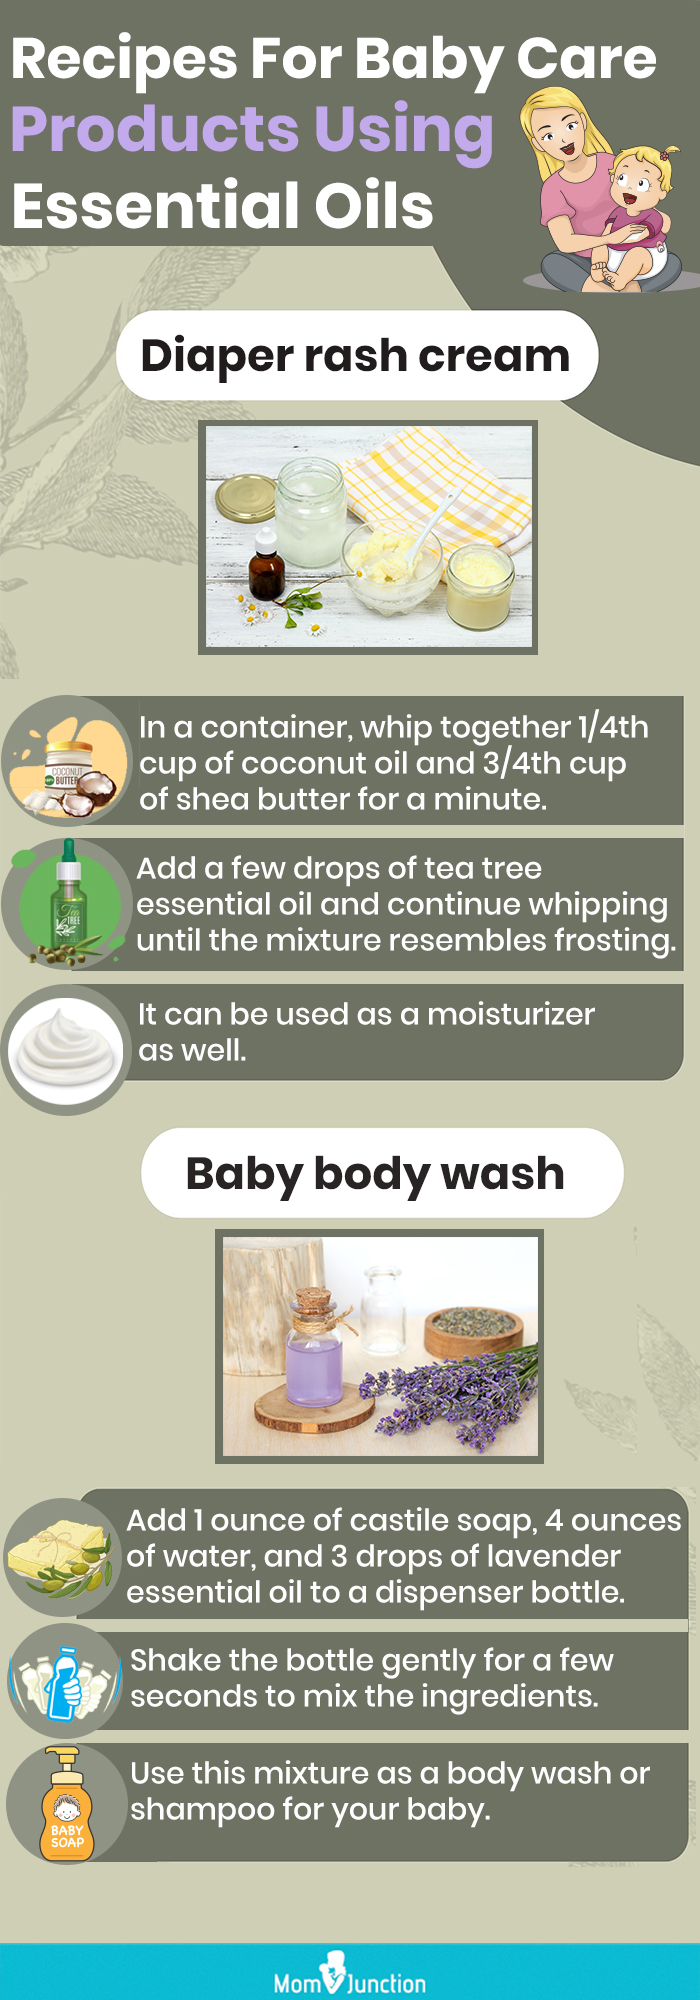 recipes for baby care products using essential oils (infographic)